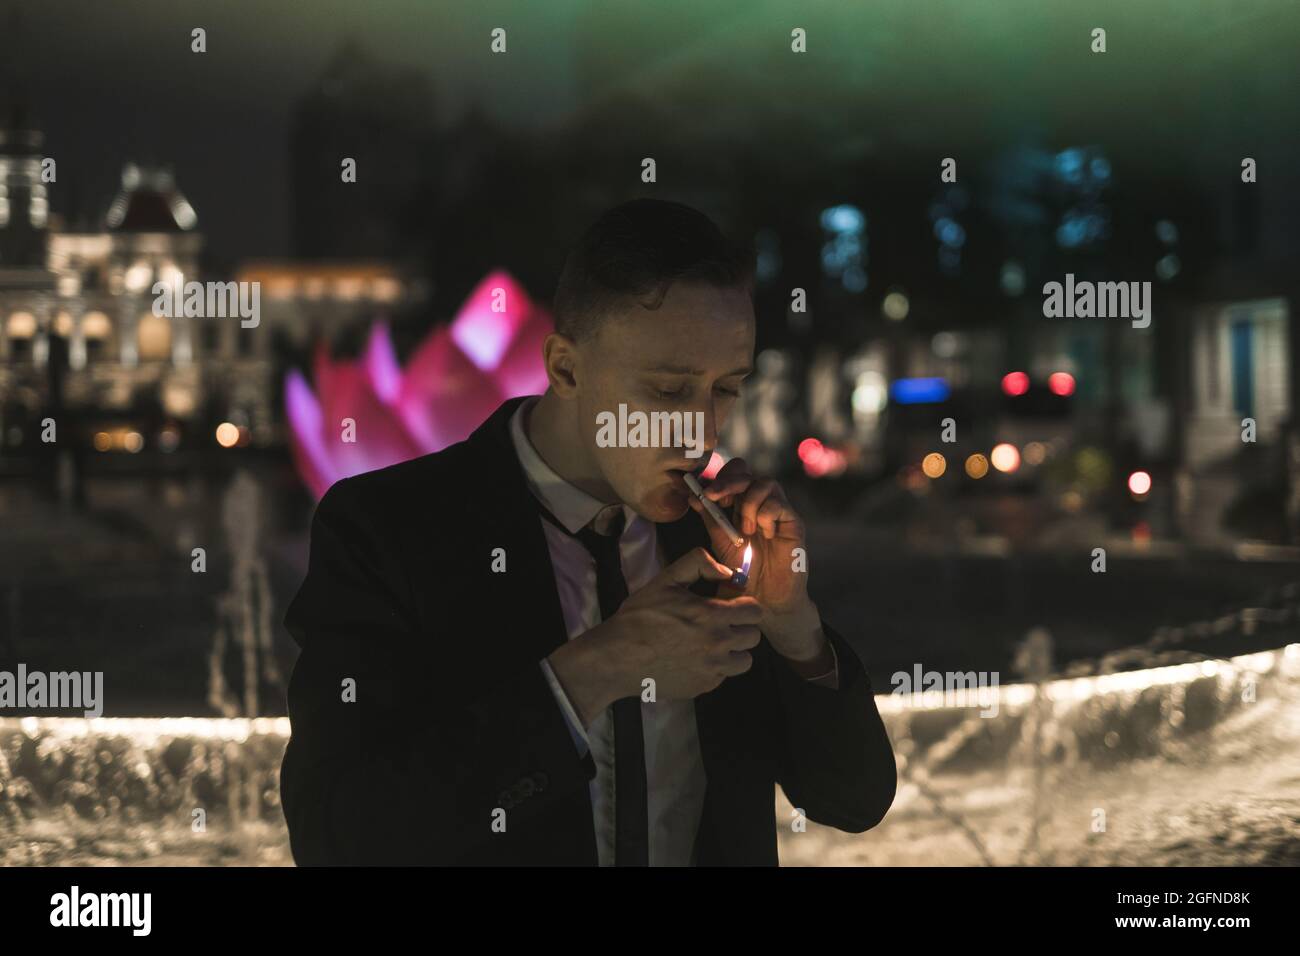 Portrait of young caucasian man in formal black suit lights a cigarette from a lighter. Night picture. Neon signs Stock Photo